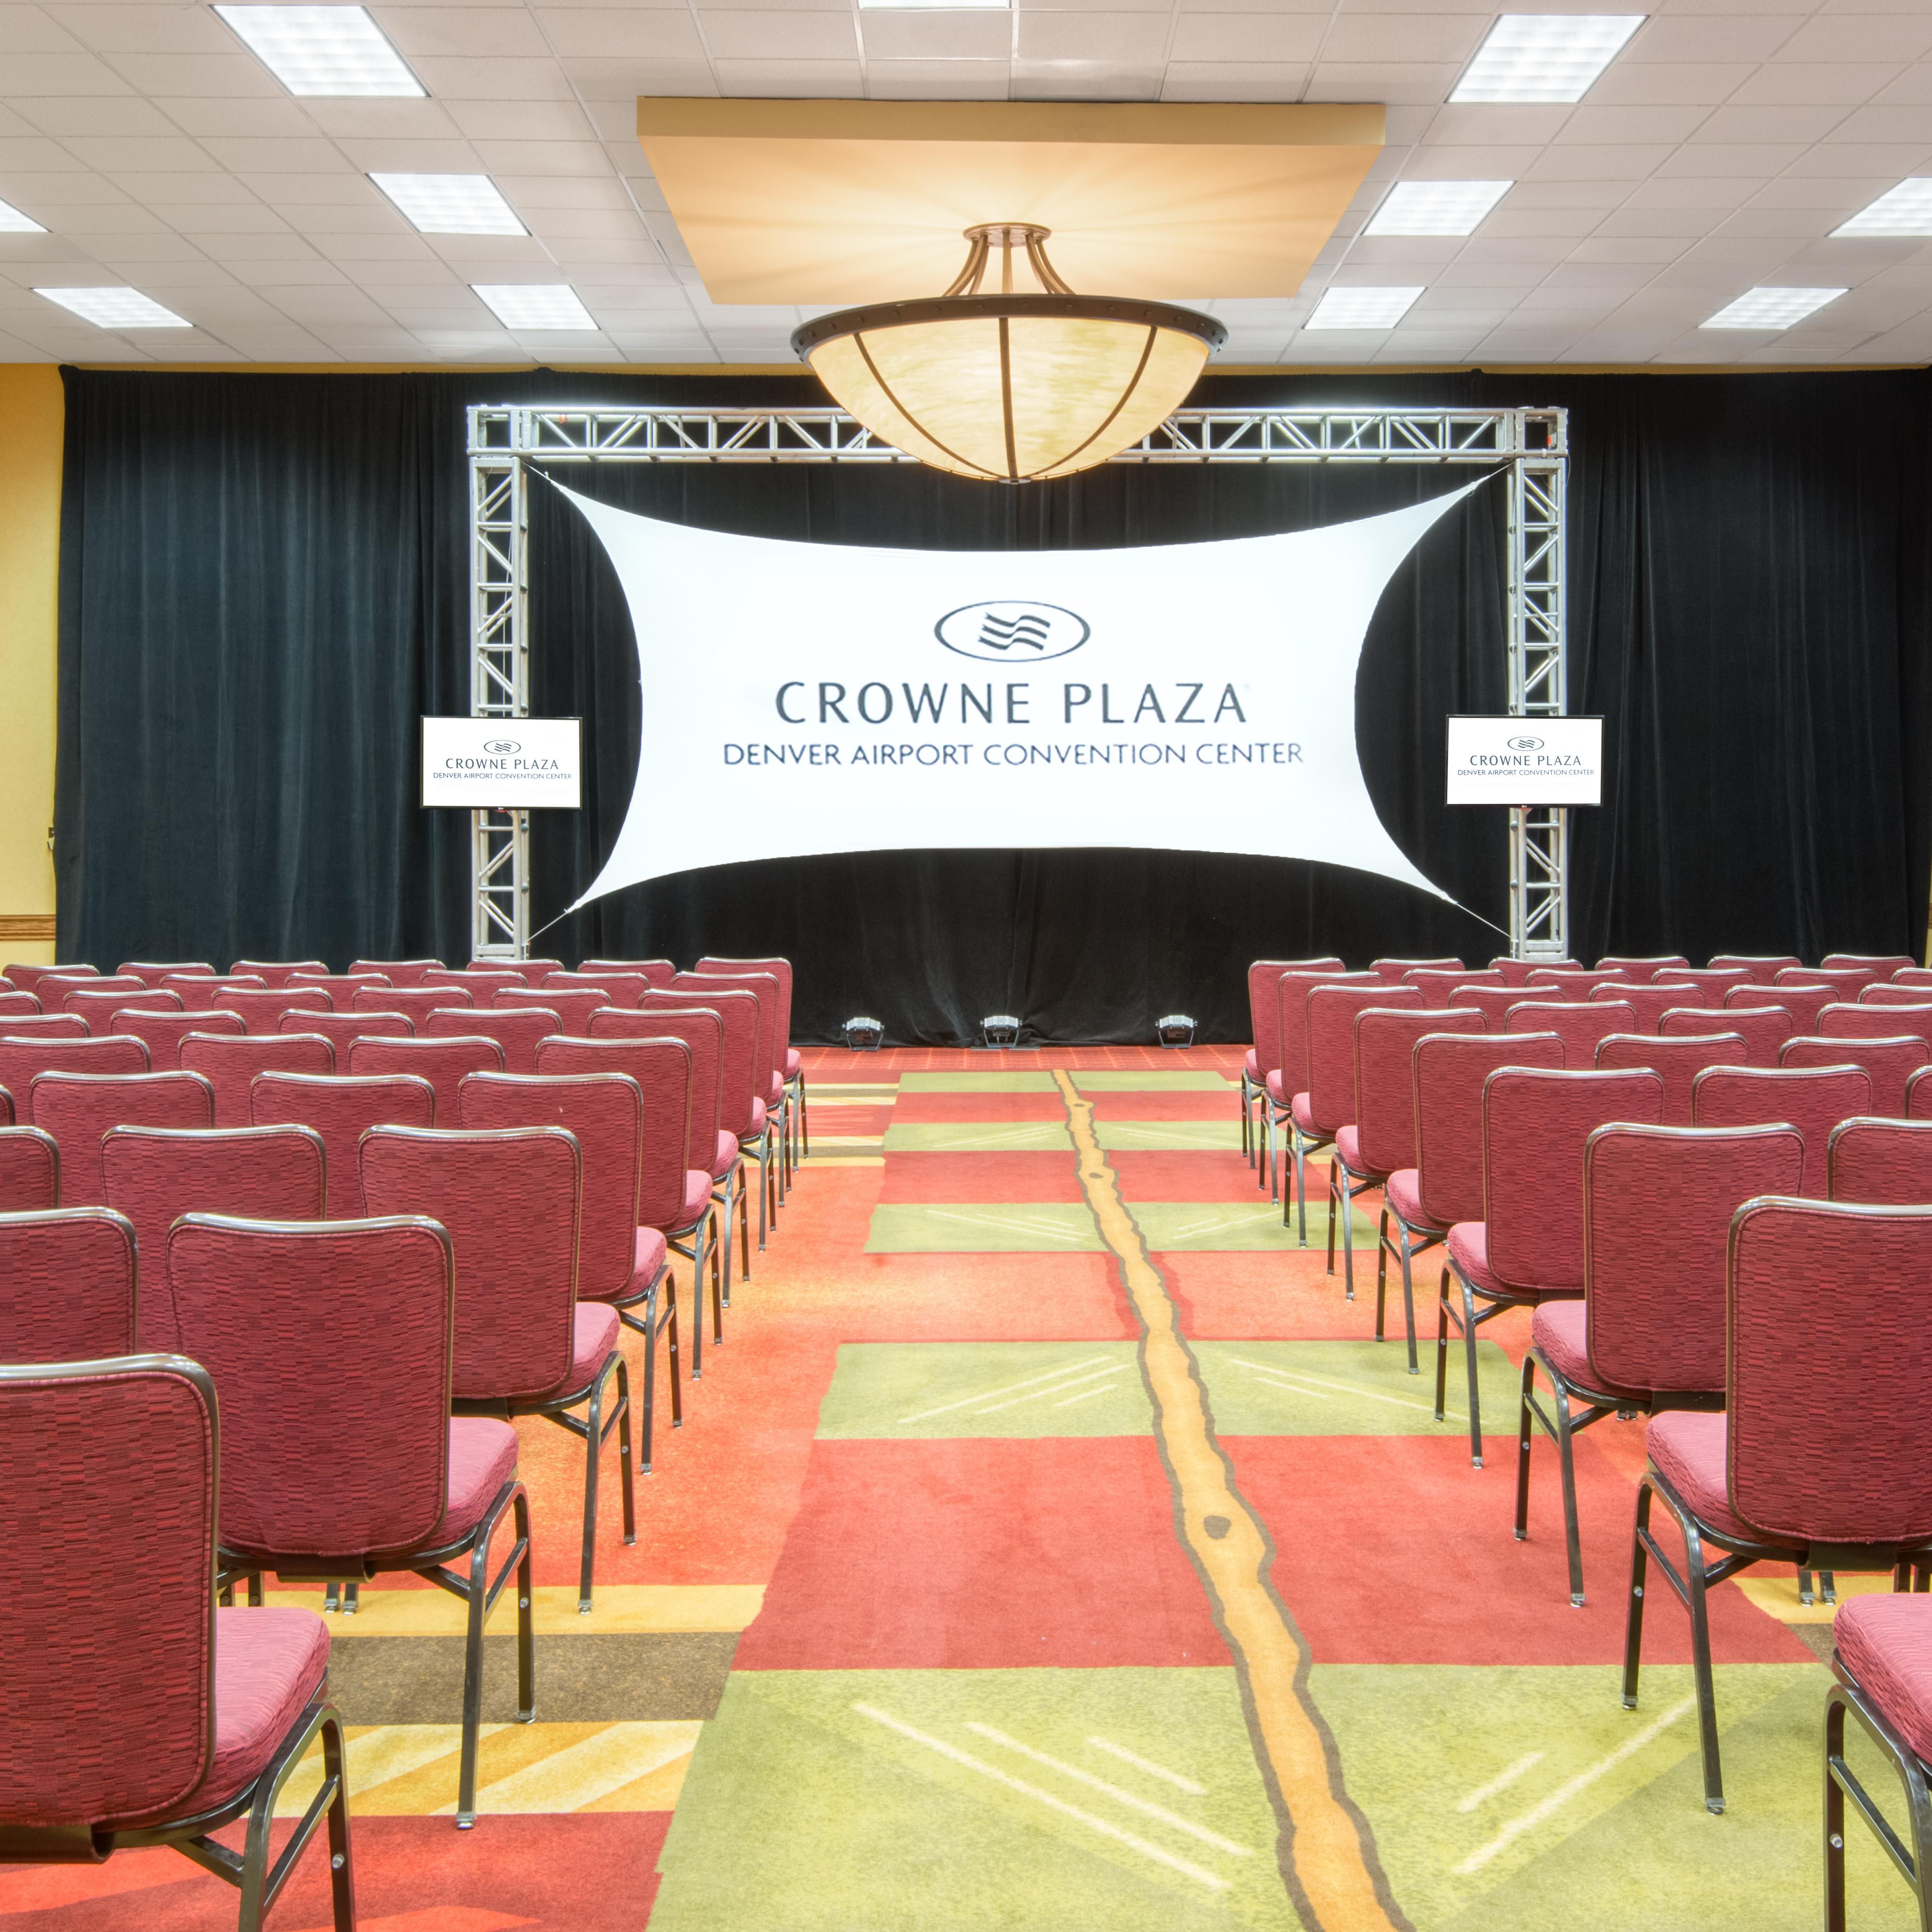 Theater style is perfect for your next big conference.